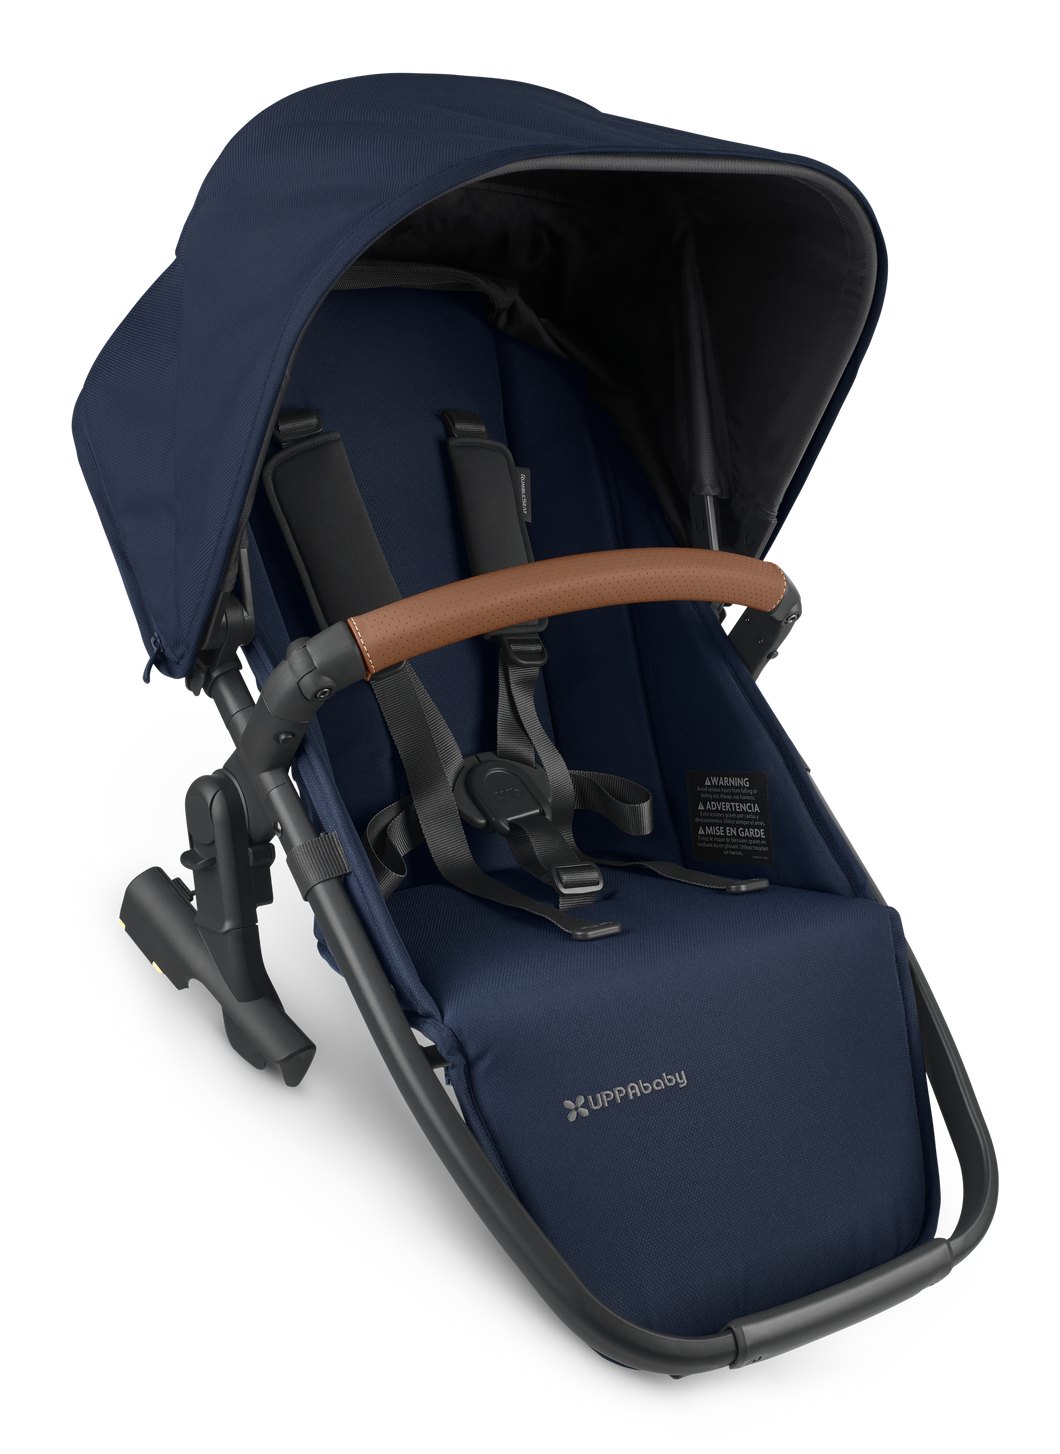 UPPAbaby VISTA V2 RumbleSeat - Open Box